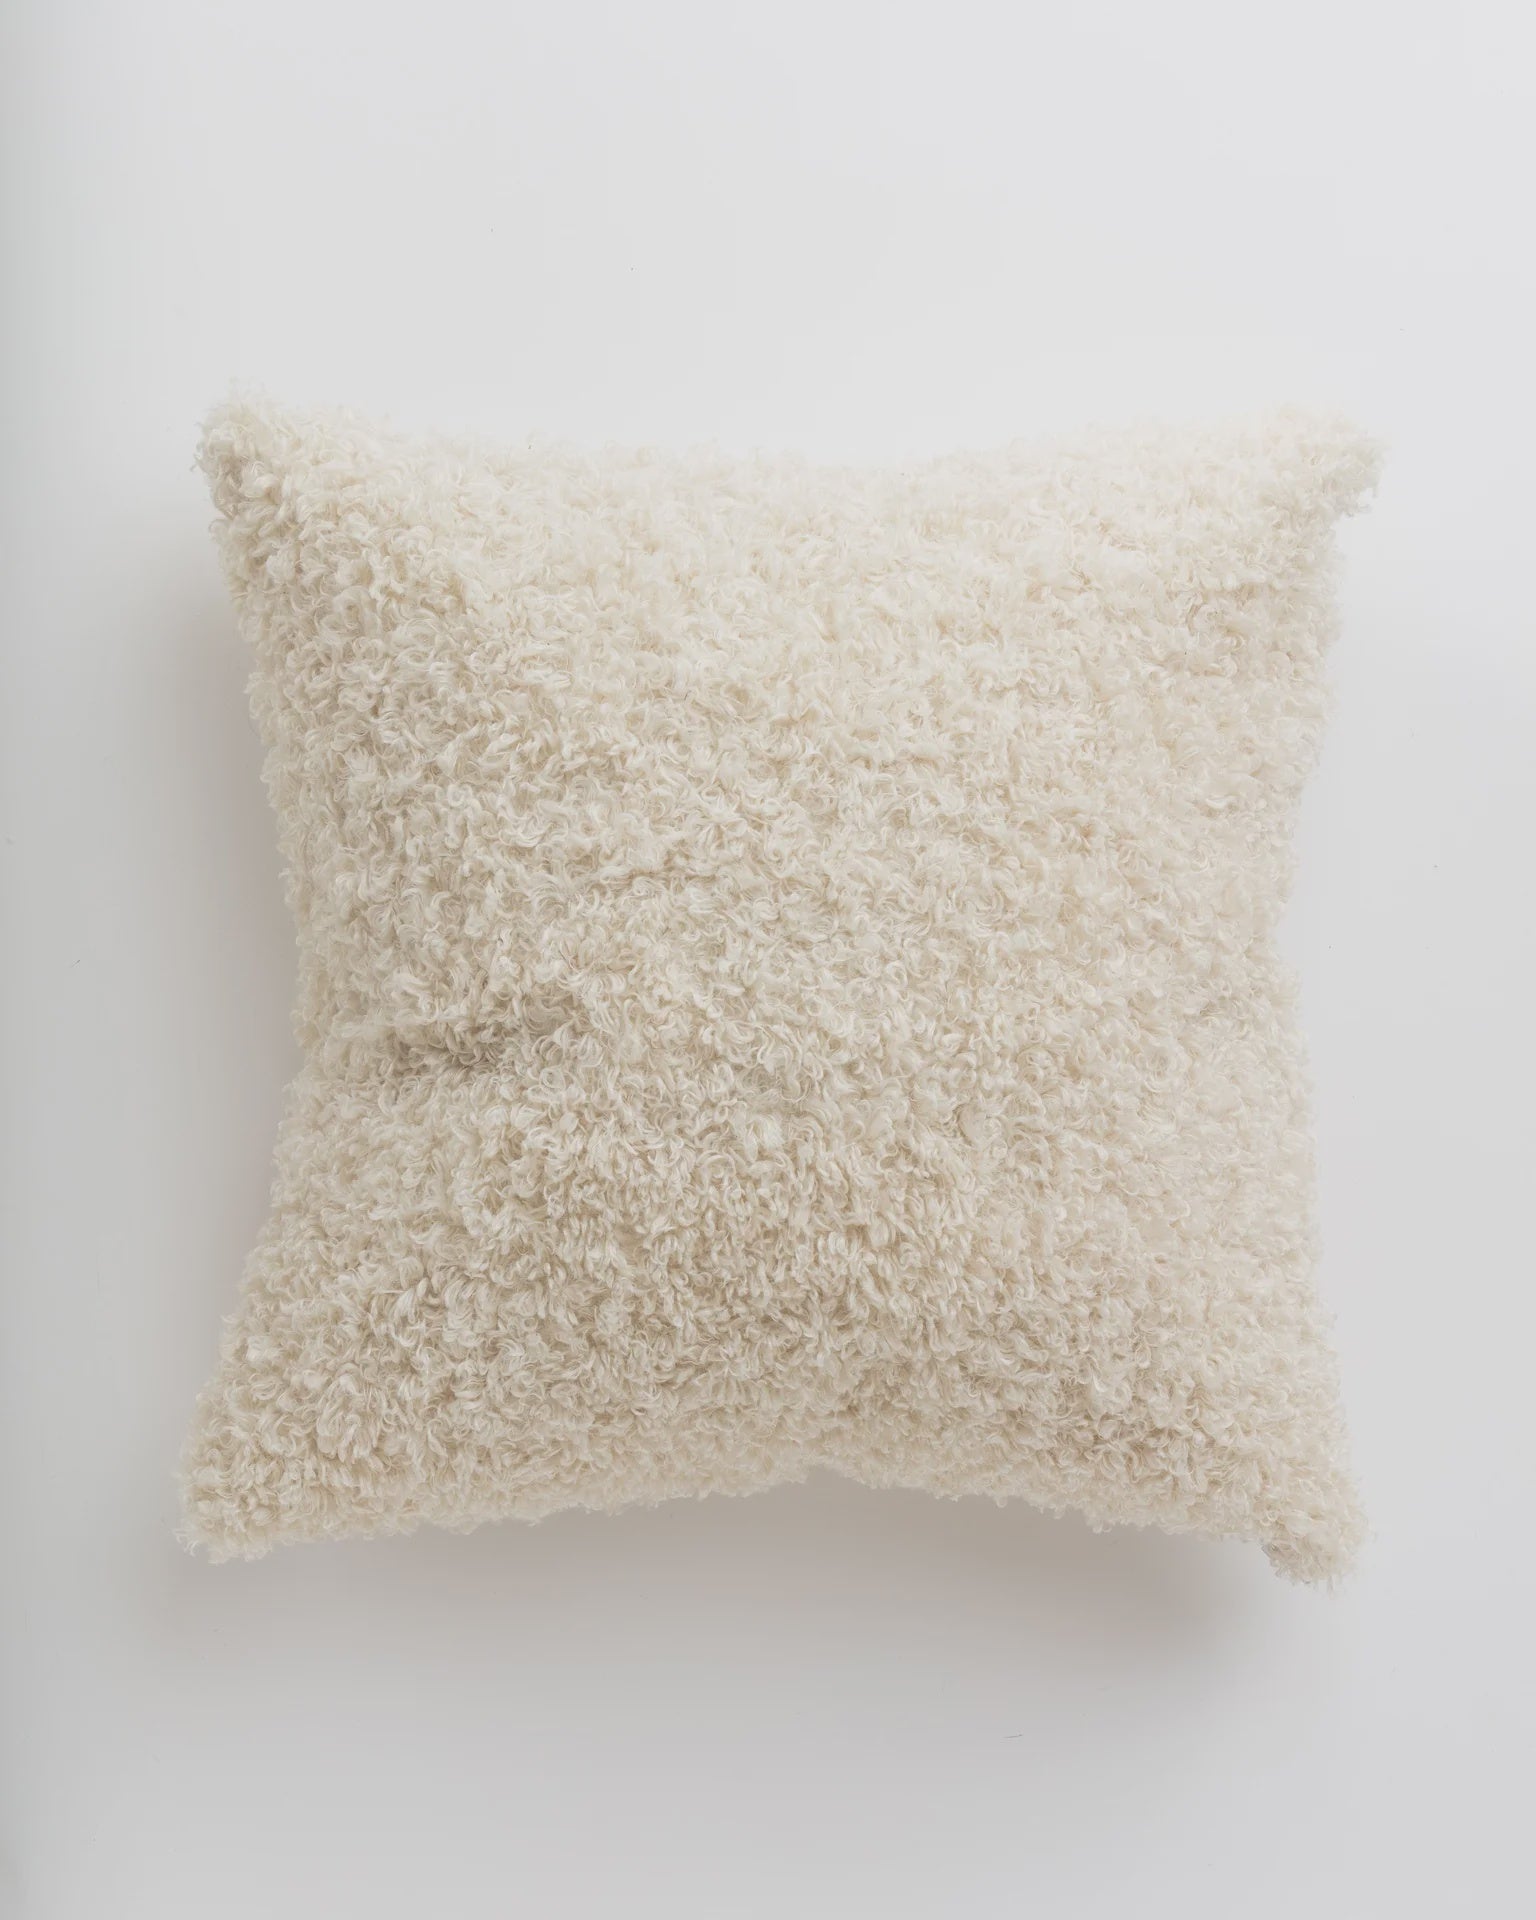 A Gabby Curly Ivory Pillow 26x26 with a textured surface on a plain white background, perfect for a cozy bungalow in Scottsdale, Arizona.